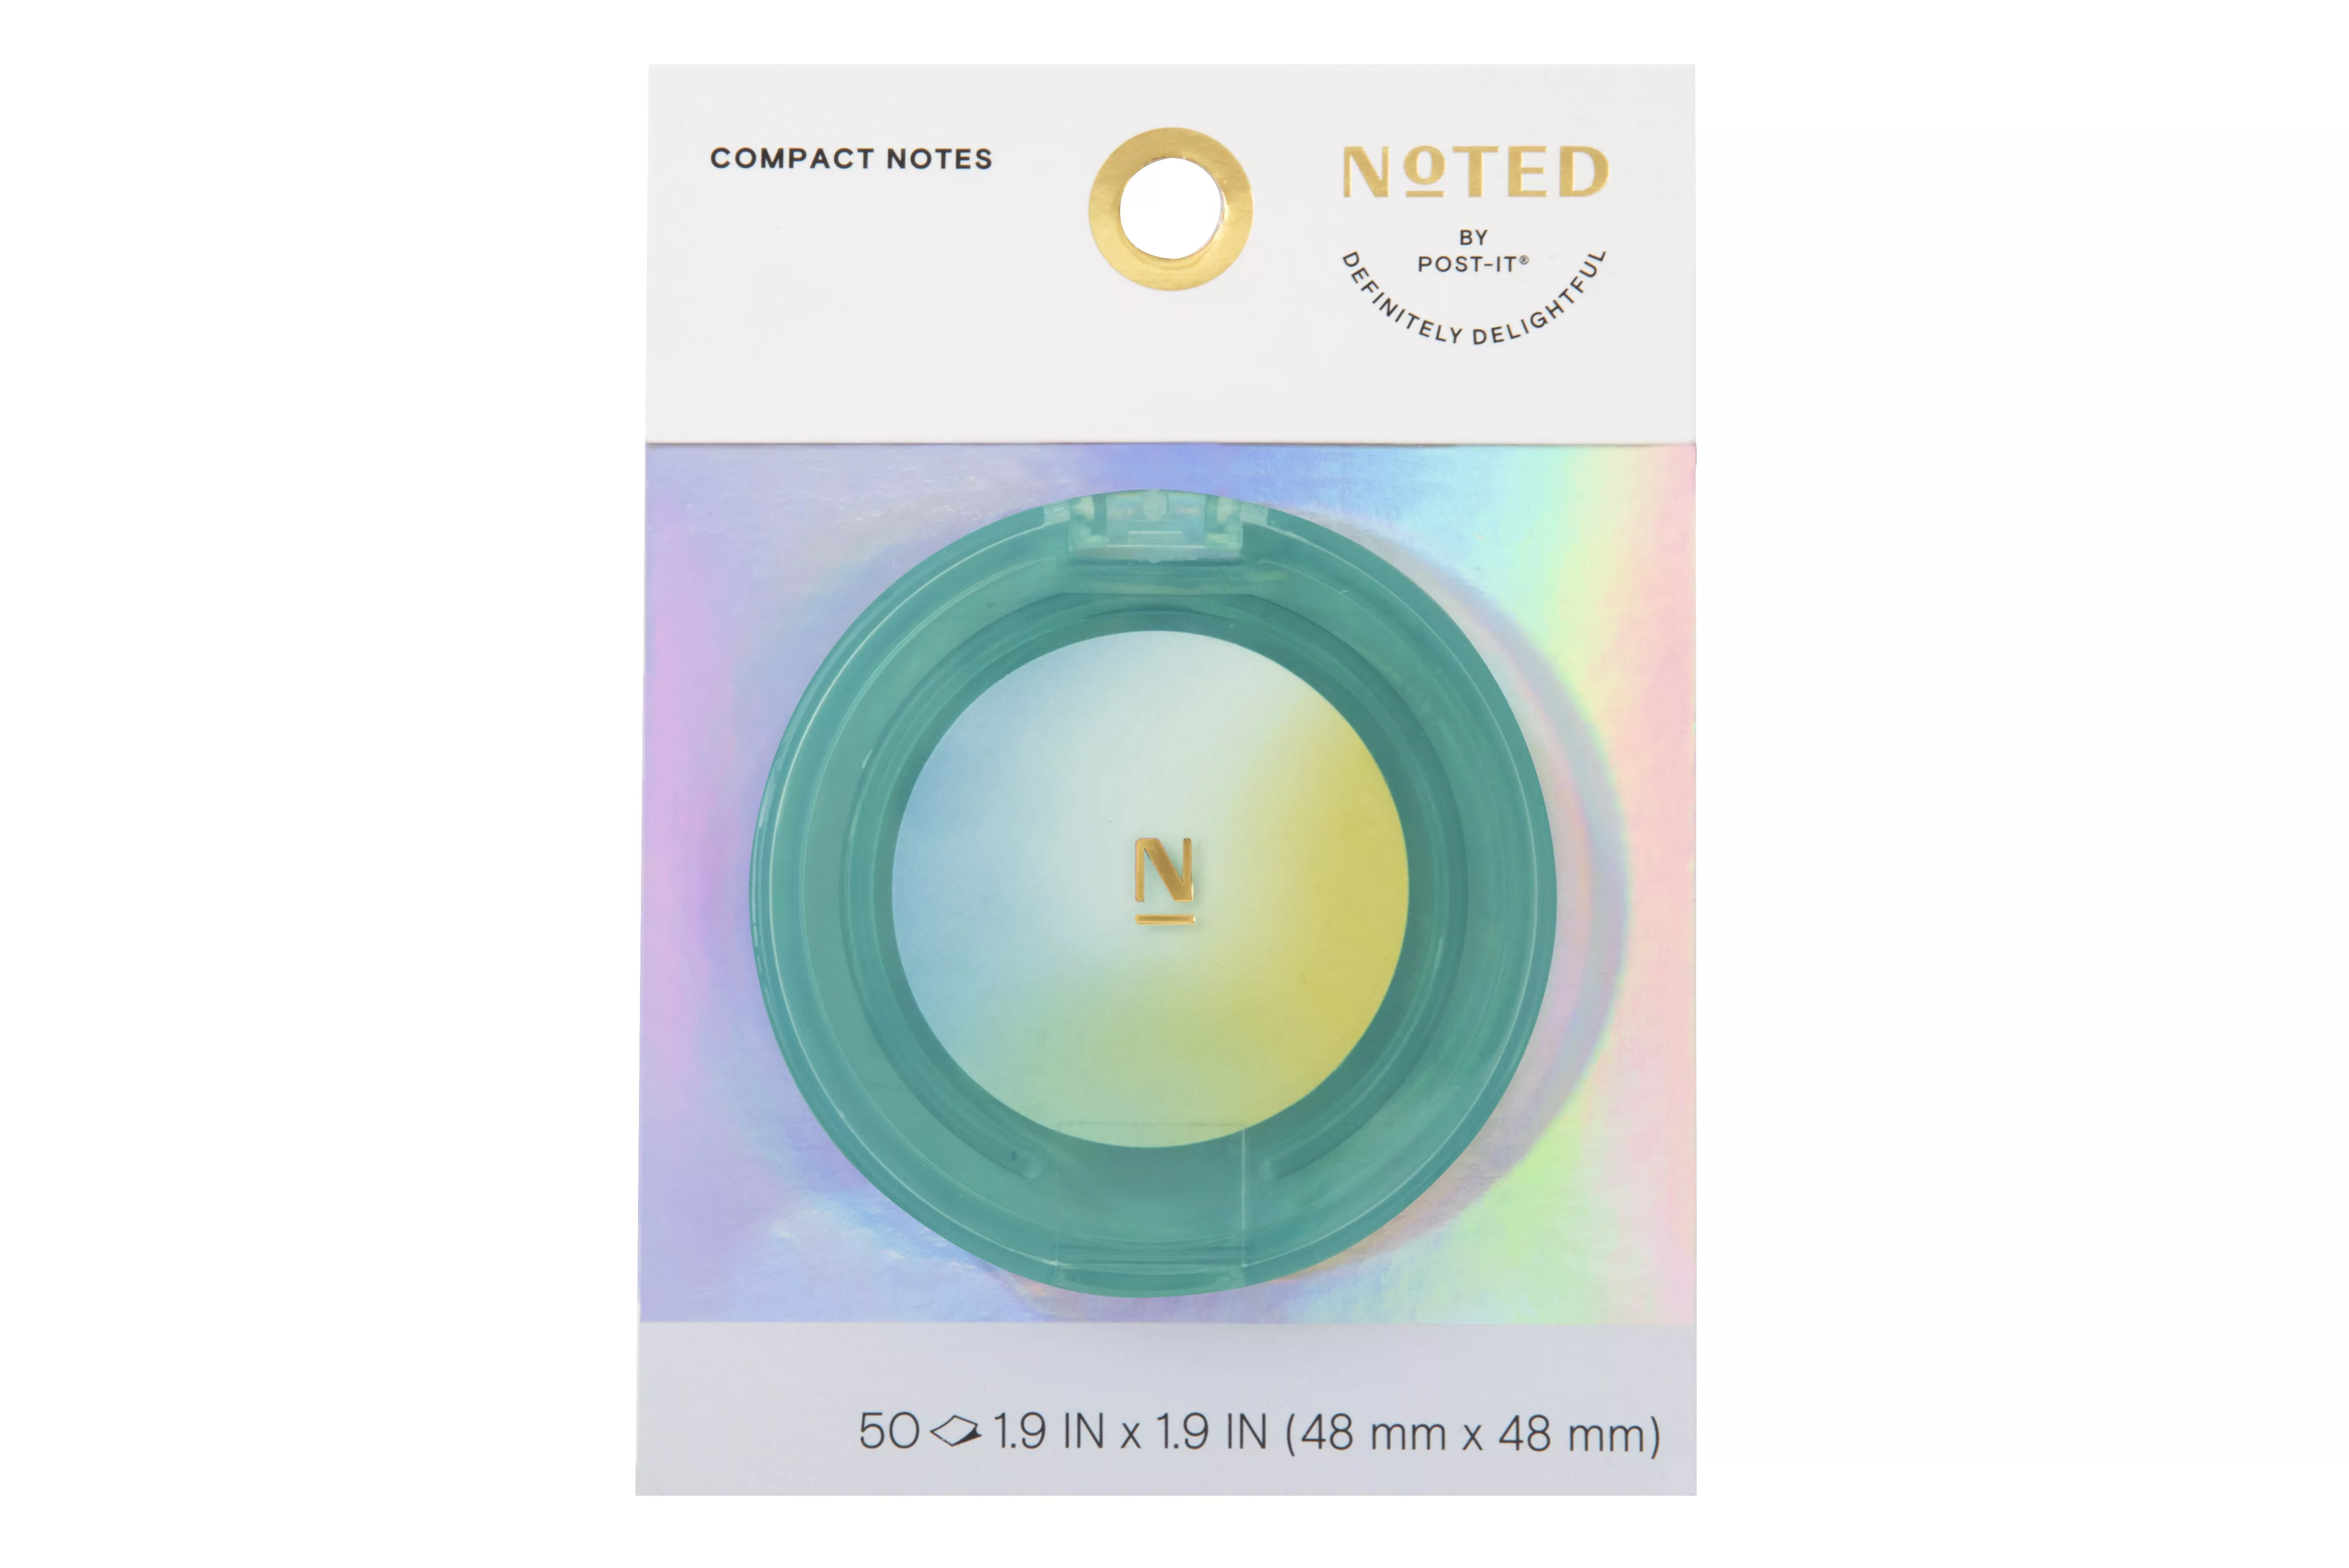 Post-it® Compact Notes NTD7-C22-1, 1.9 in x 1.9 in (48 mm x 48 mm)